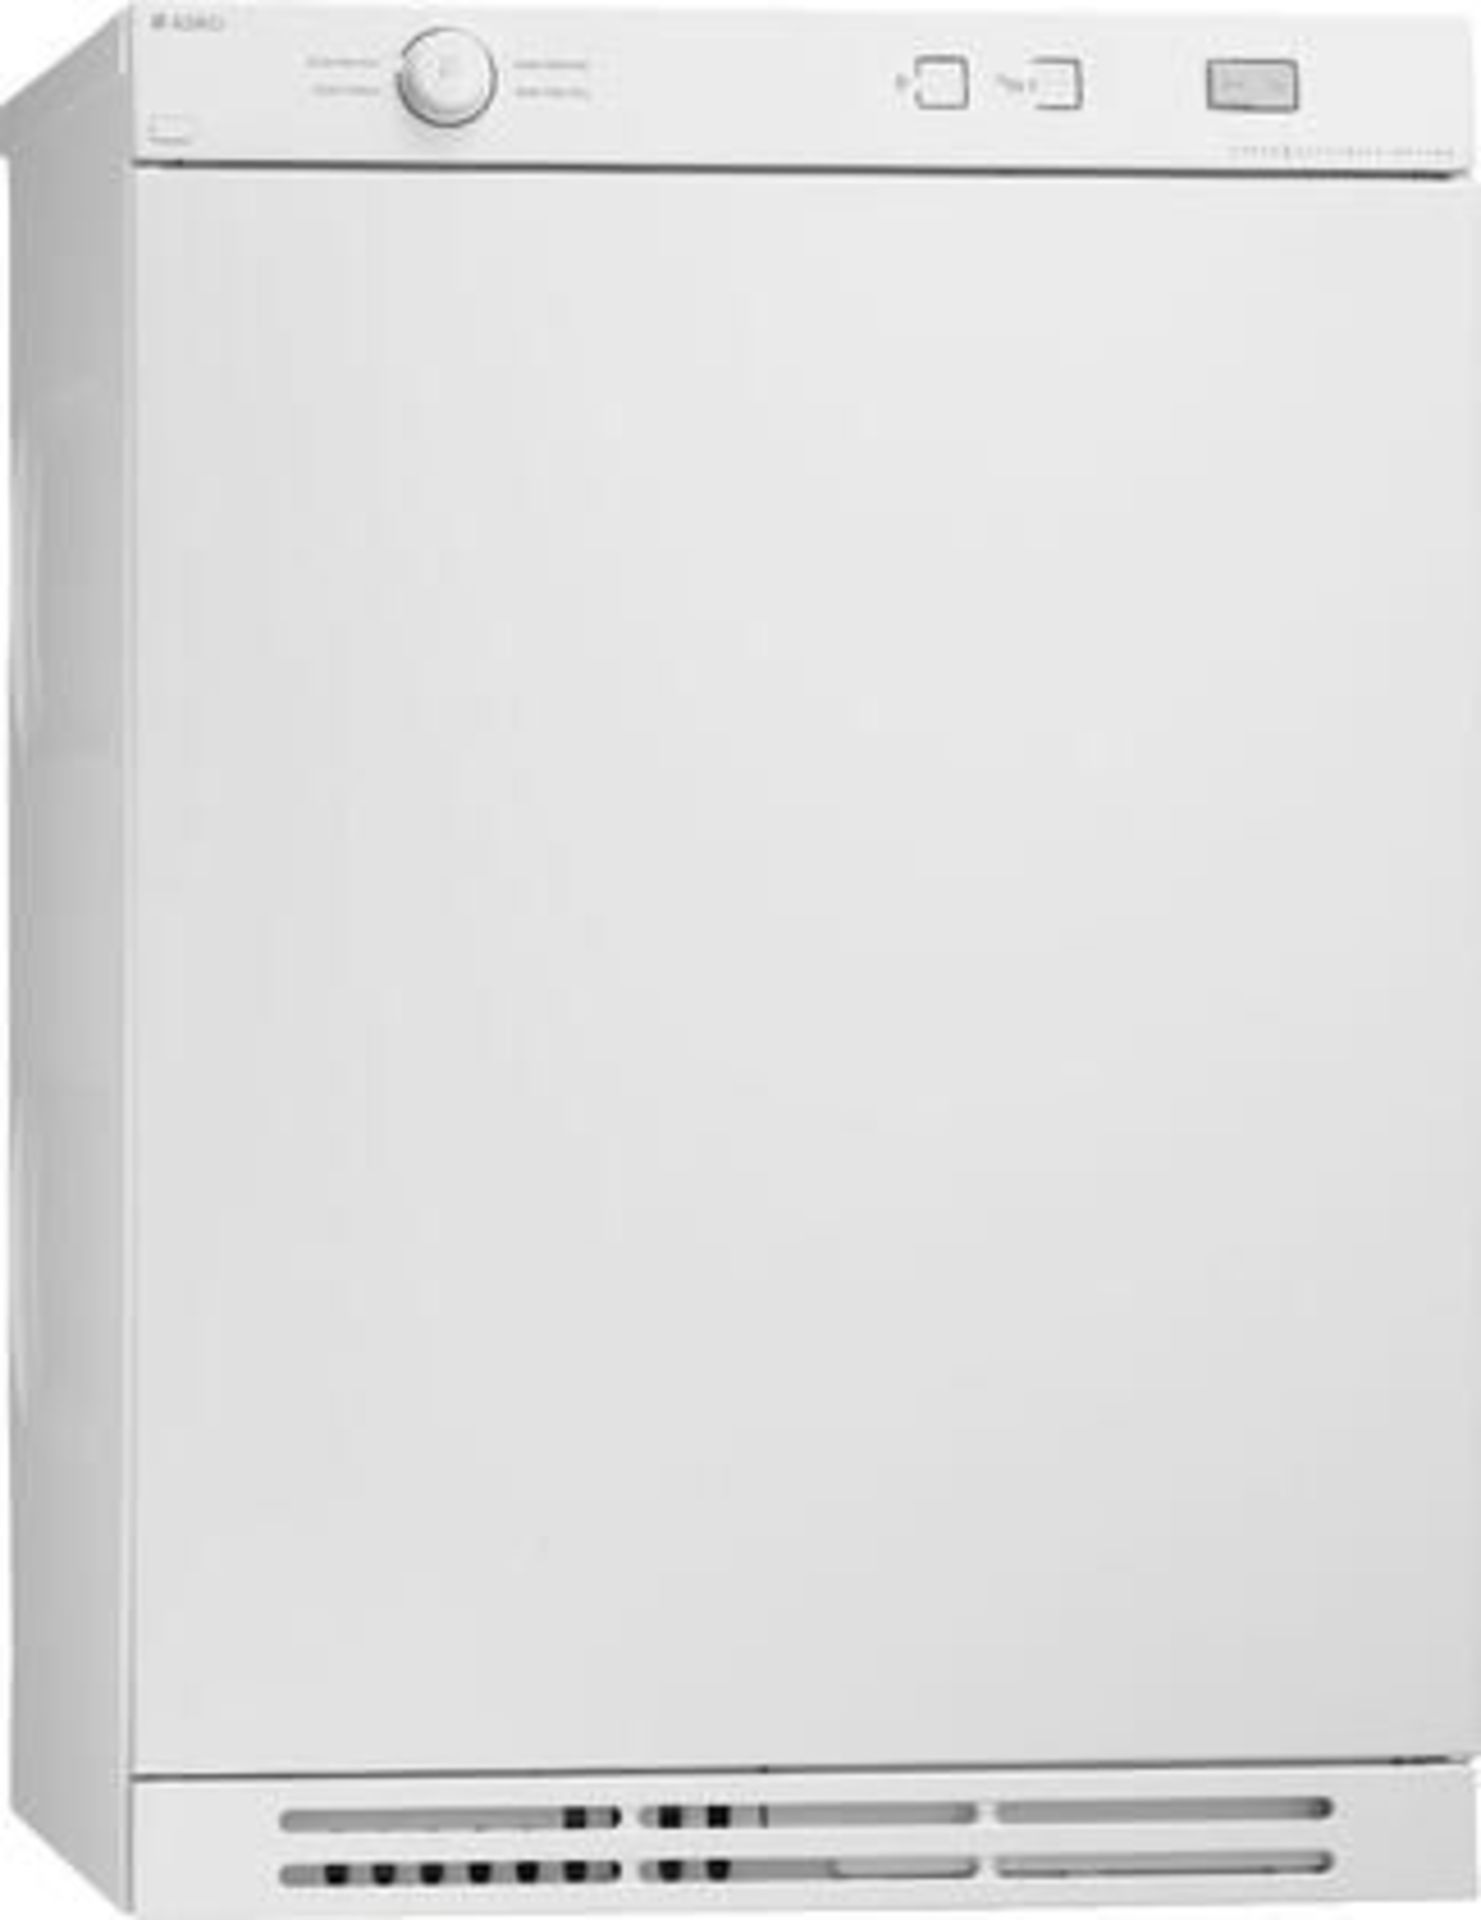 Asko mod. T744CWCD, 24'' Electric Dryer, 3.9 Cu. Ft., Stainless Steel Drum, White